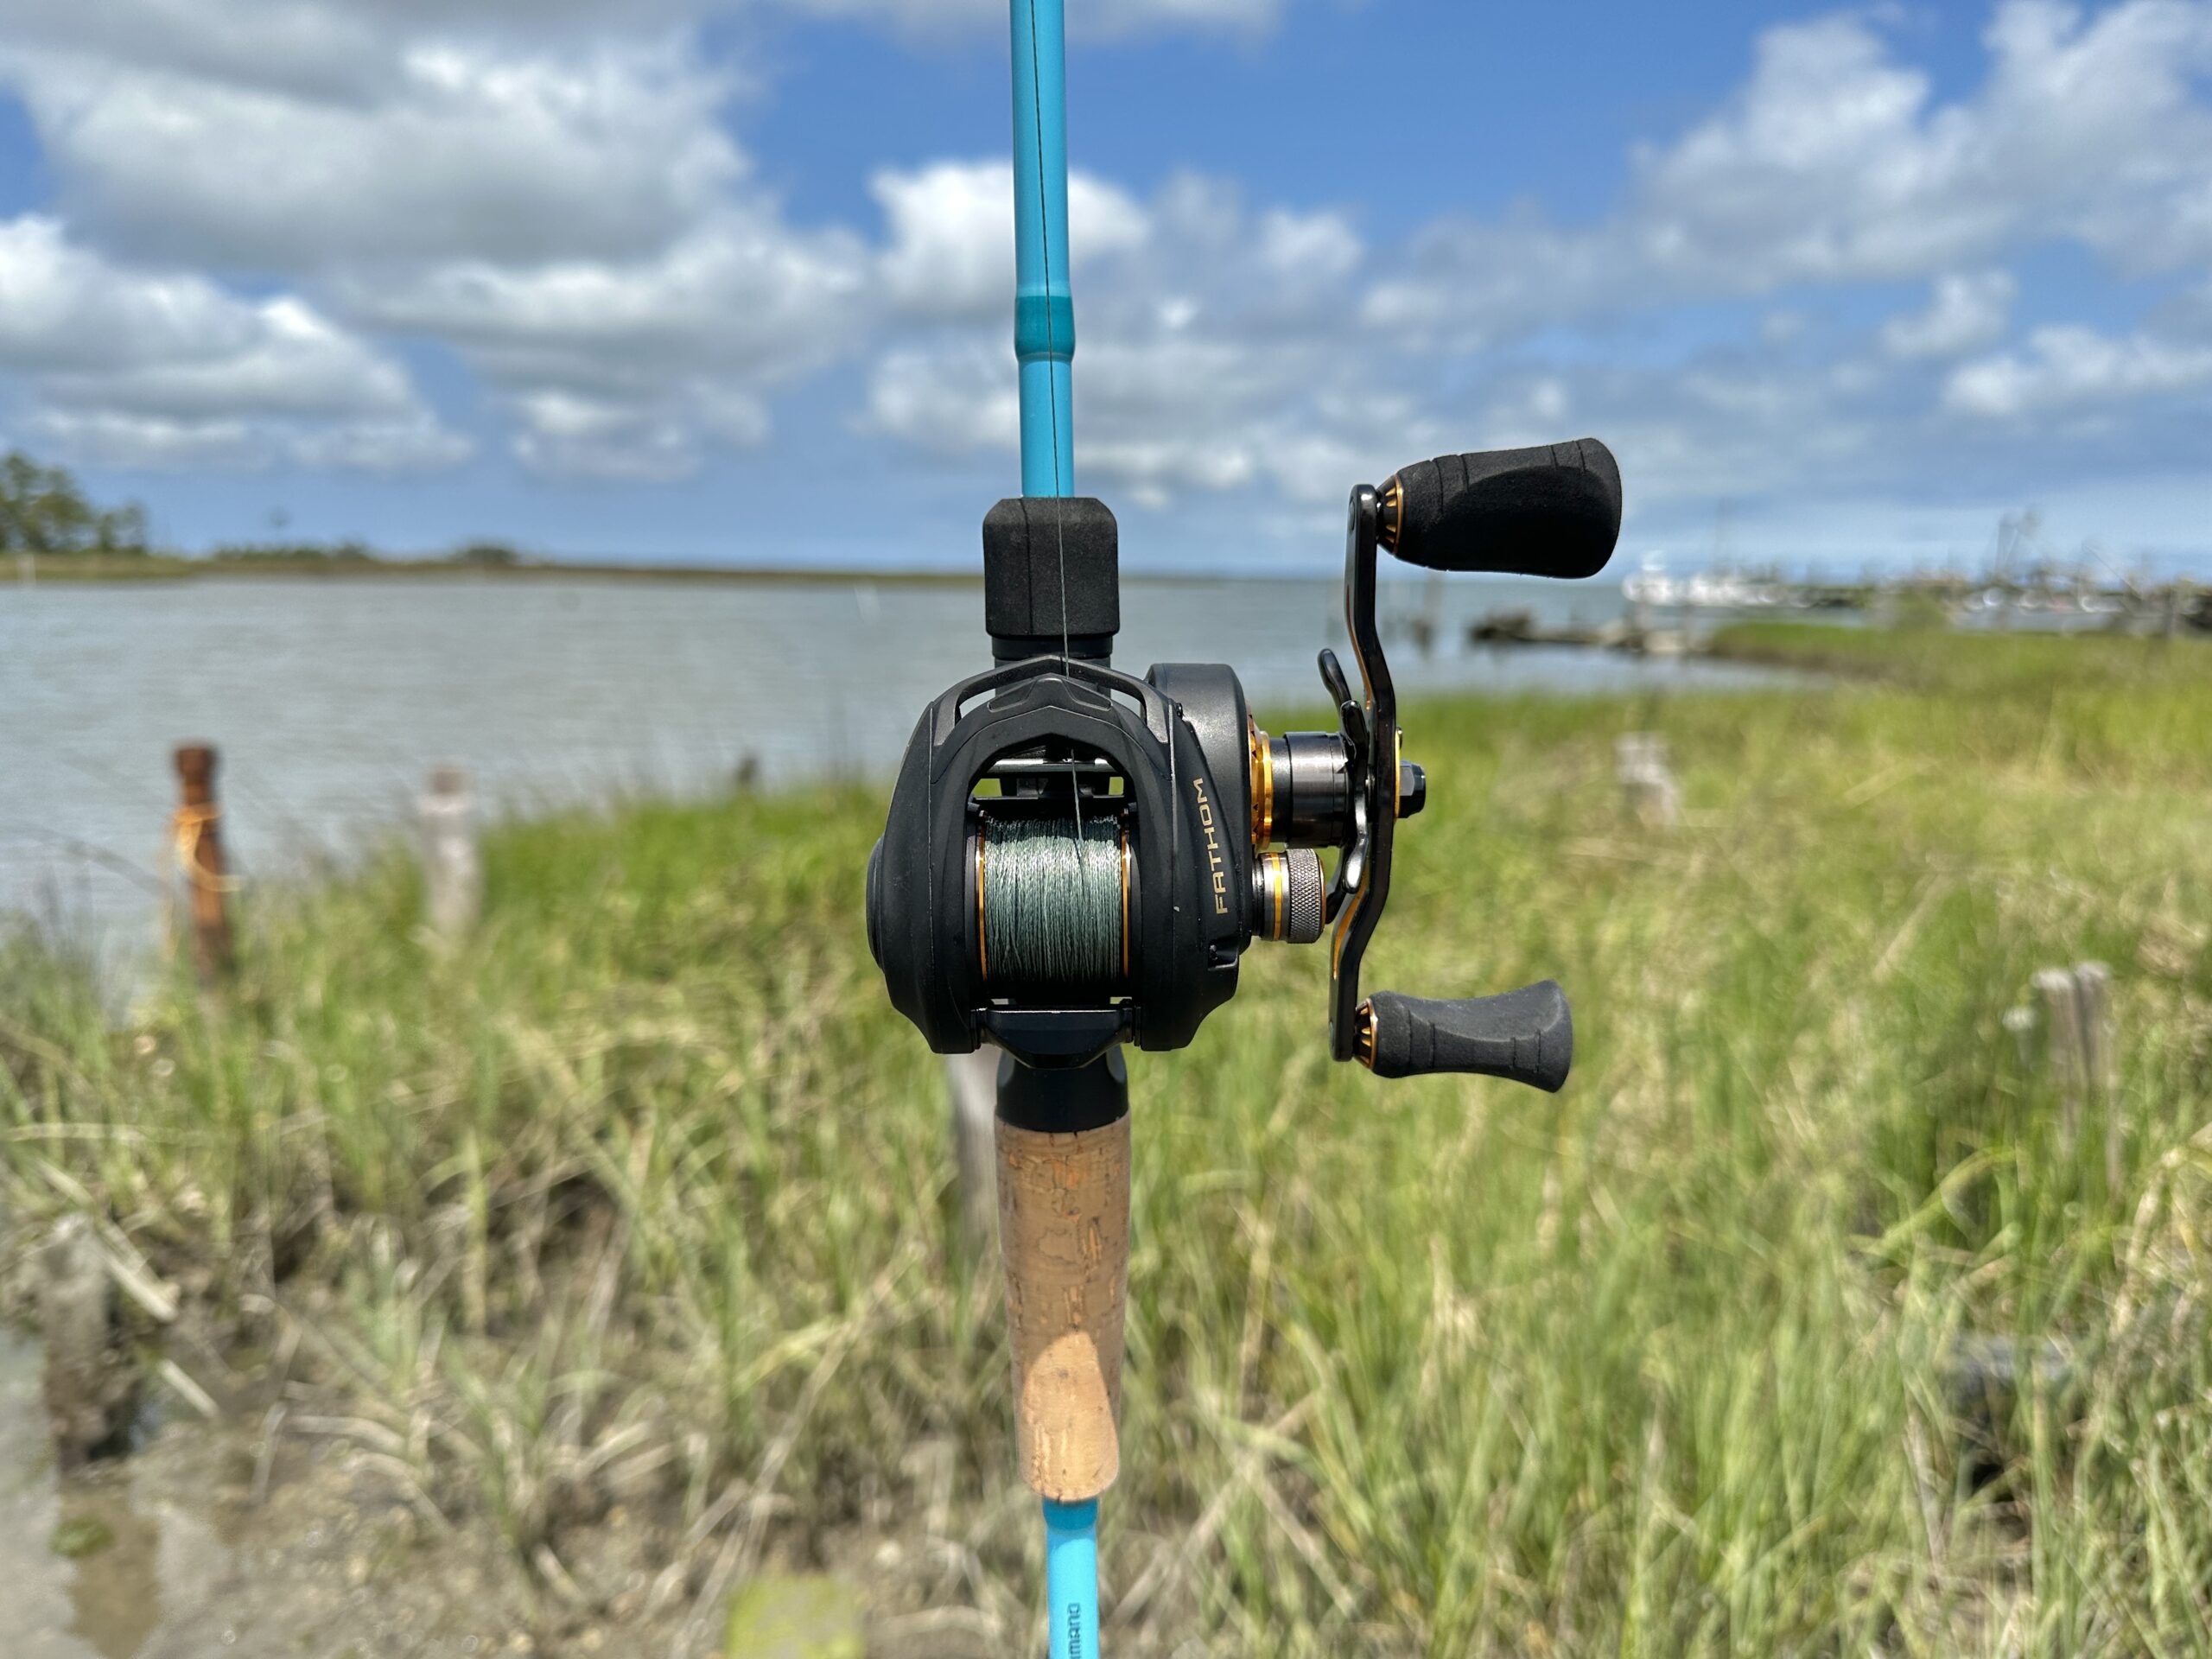 Building Out Your Quiver: Rod and Reel Combos for Targeting New